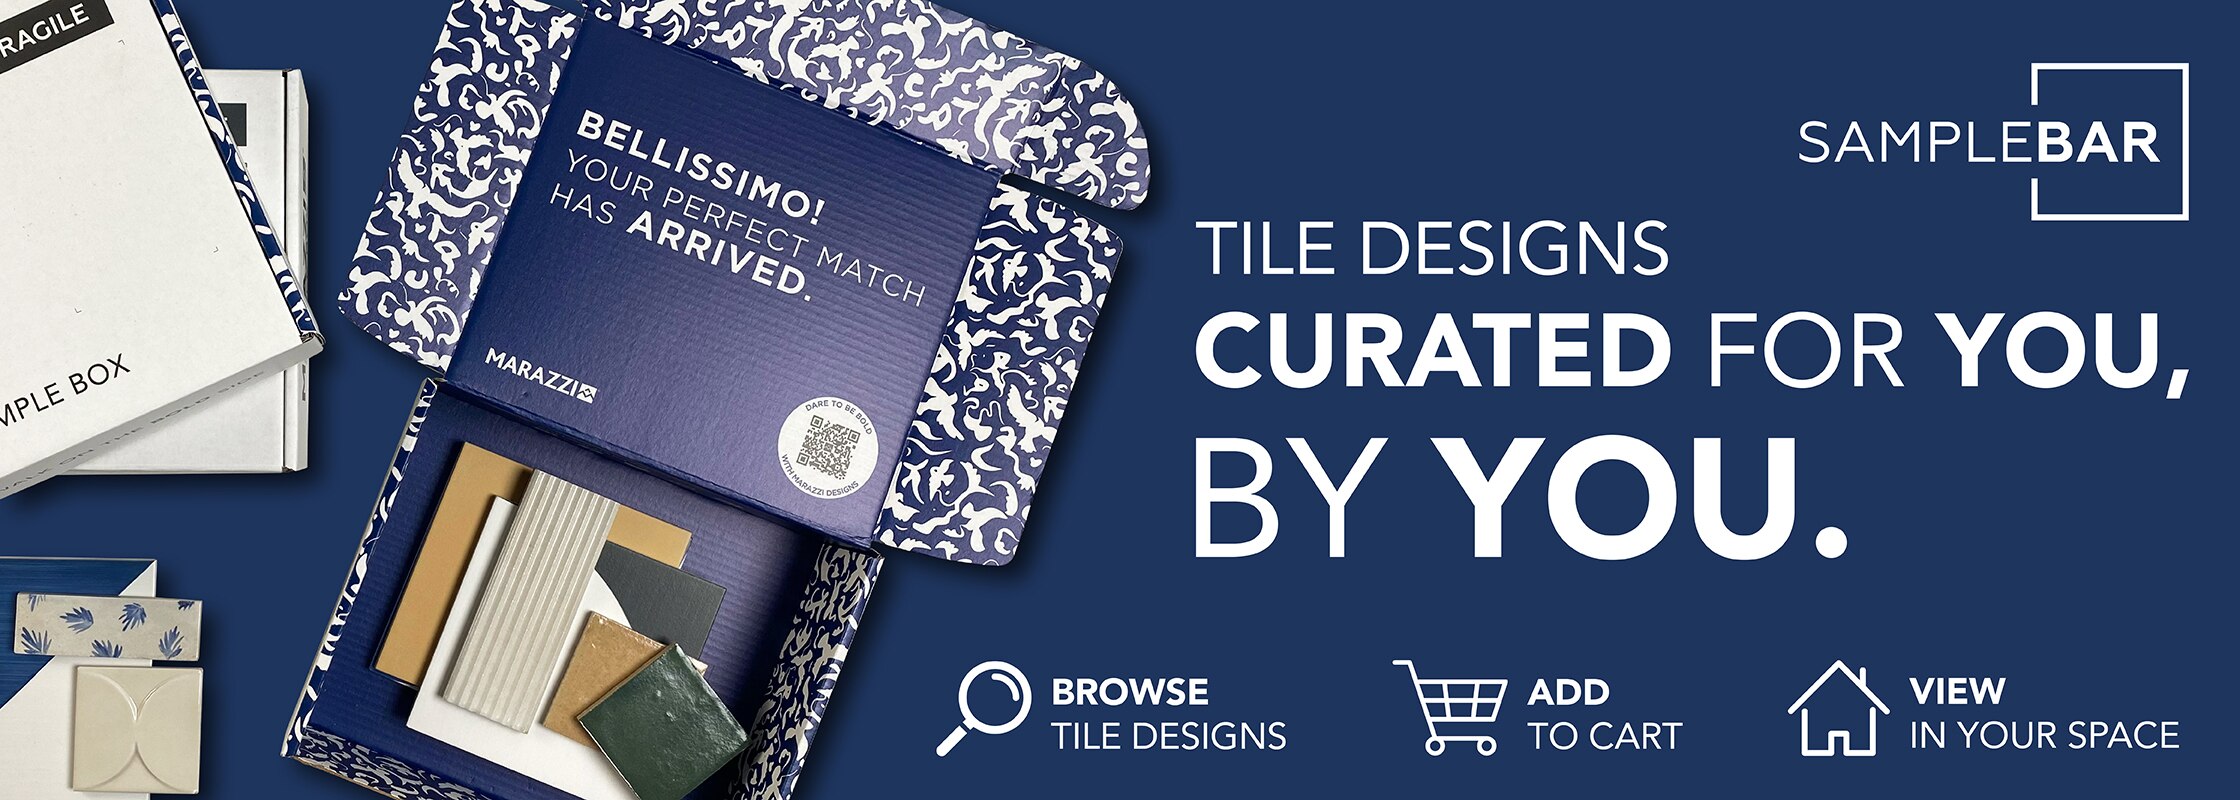 SampleBar Tile Designs curated for you by you